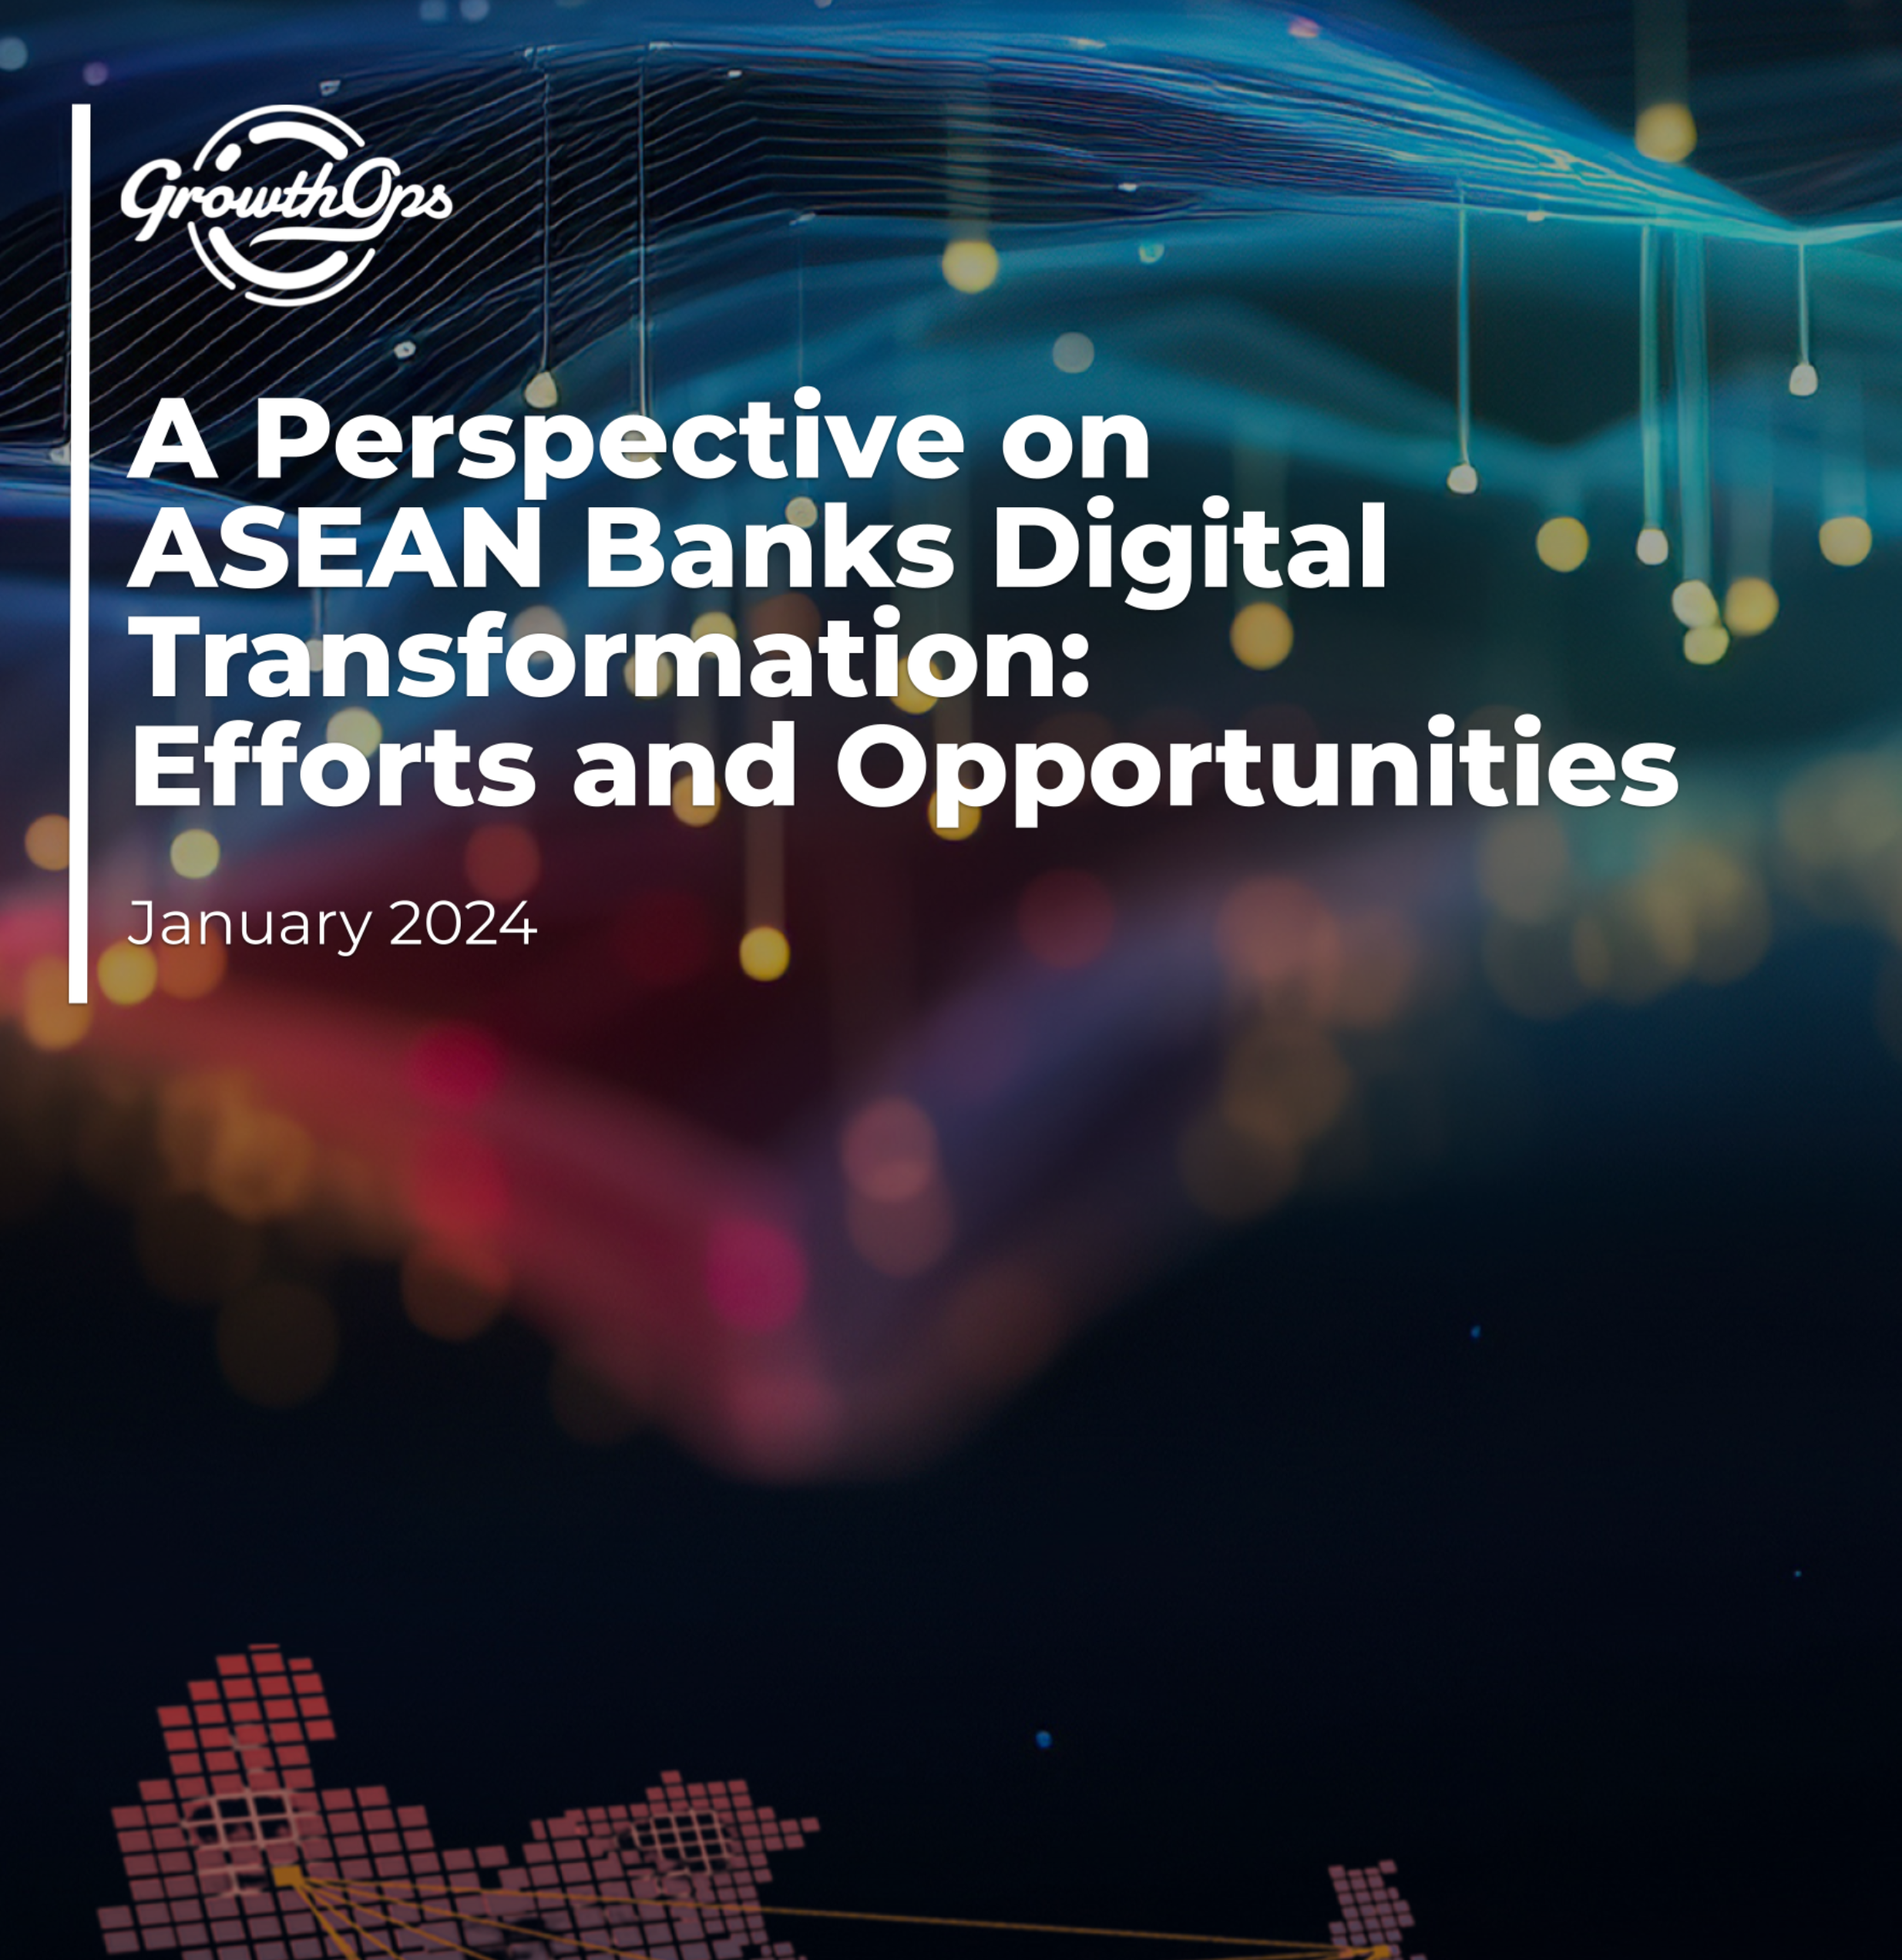 A Perspective on ASEAN Banks Digital Transformation: Efforts and Opportunities